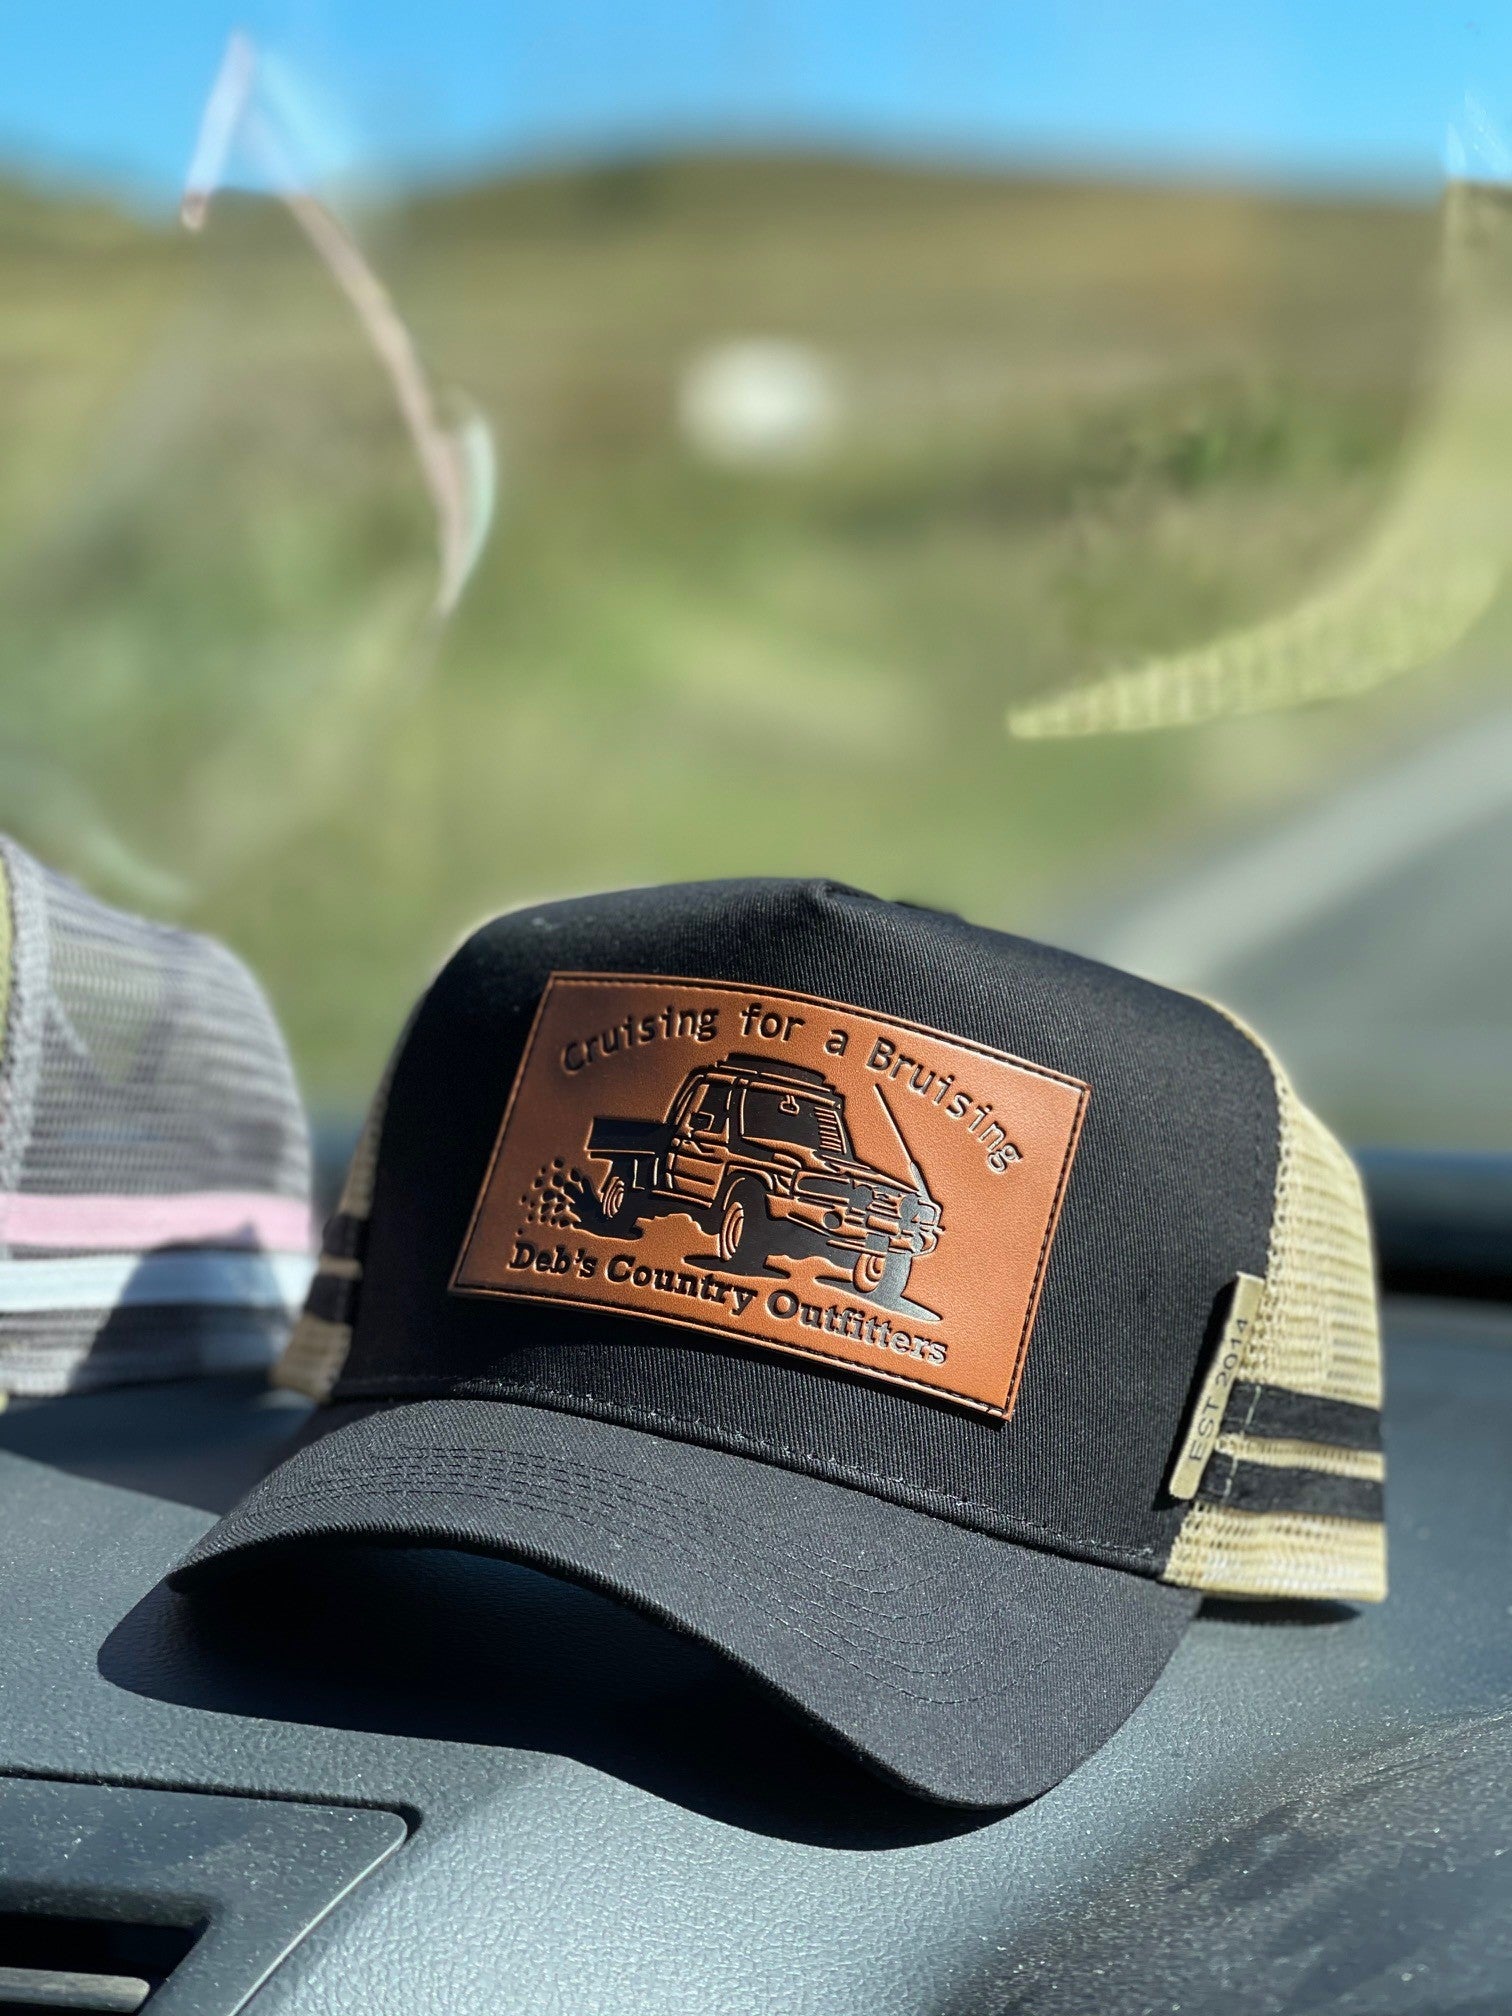 Debs Country Outfitters Black Cruising for a Bruising Cruiser Trucker